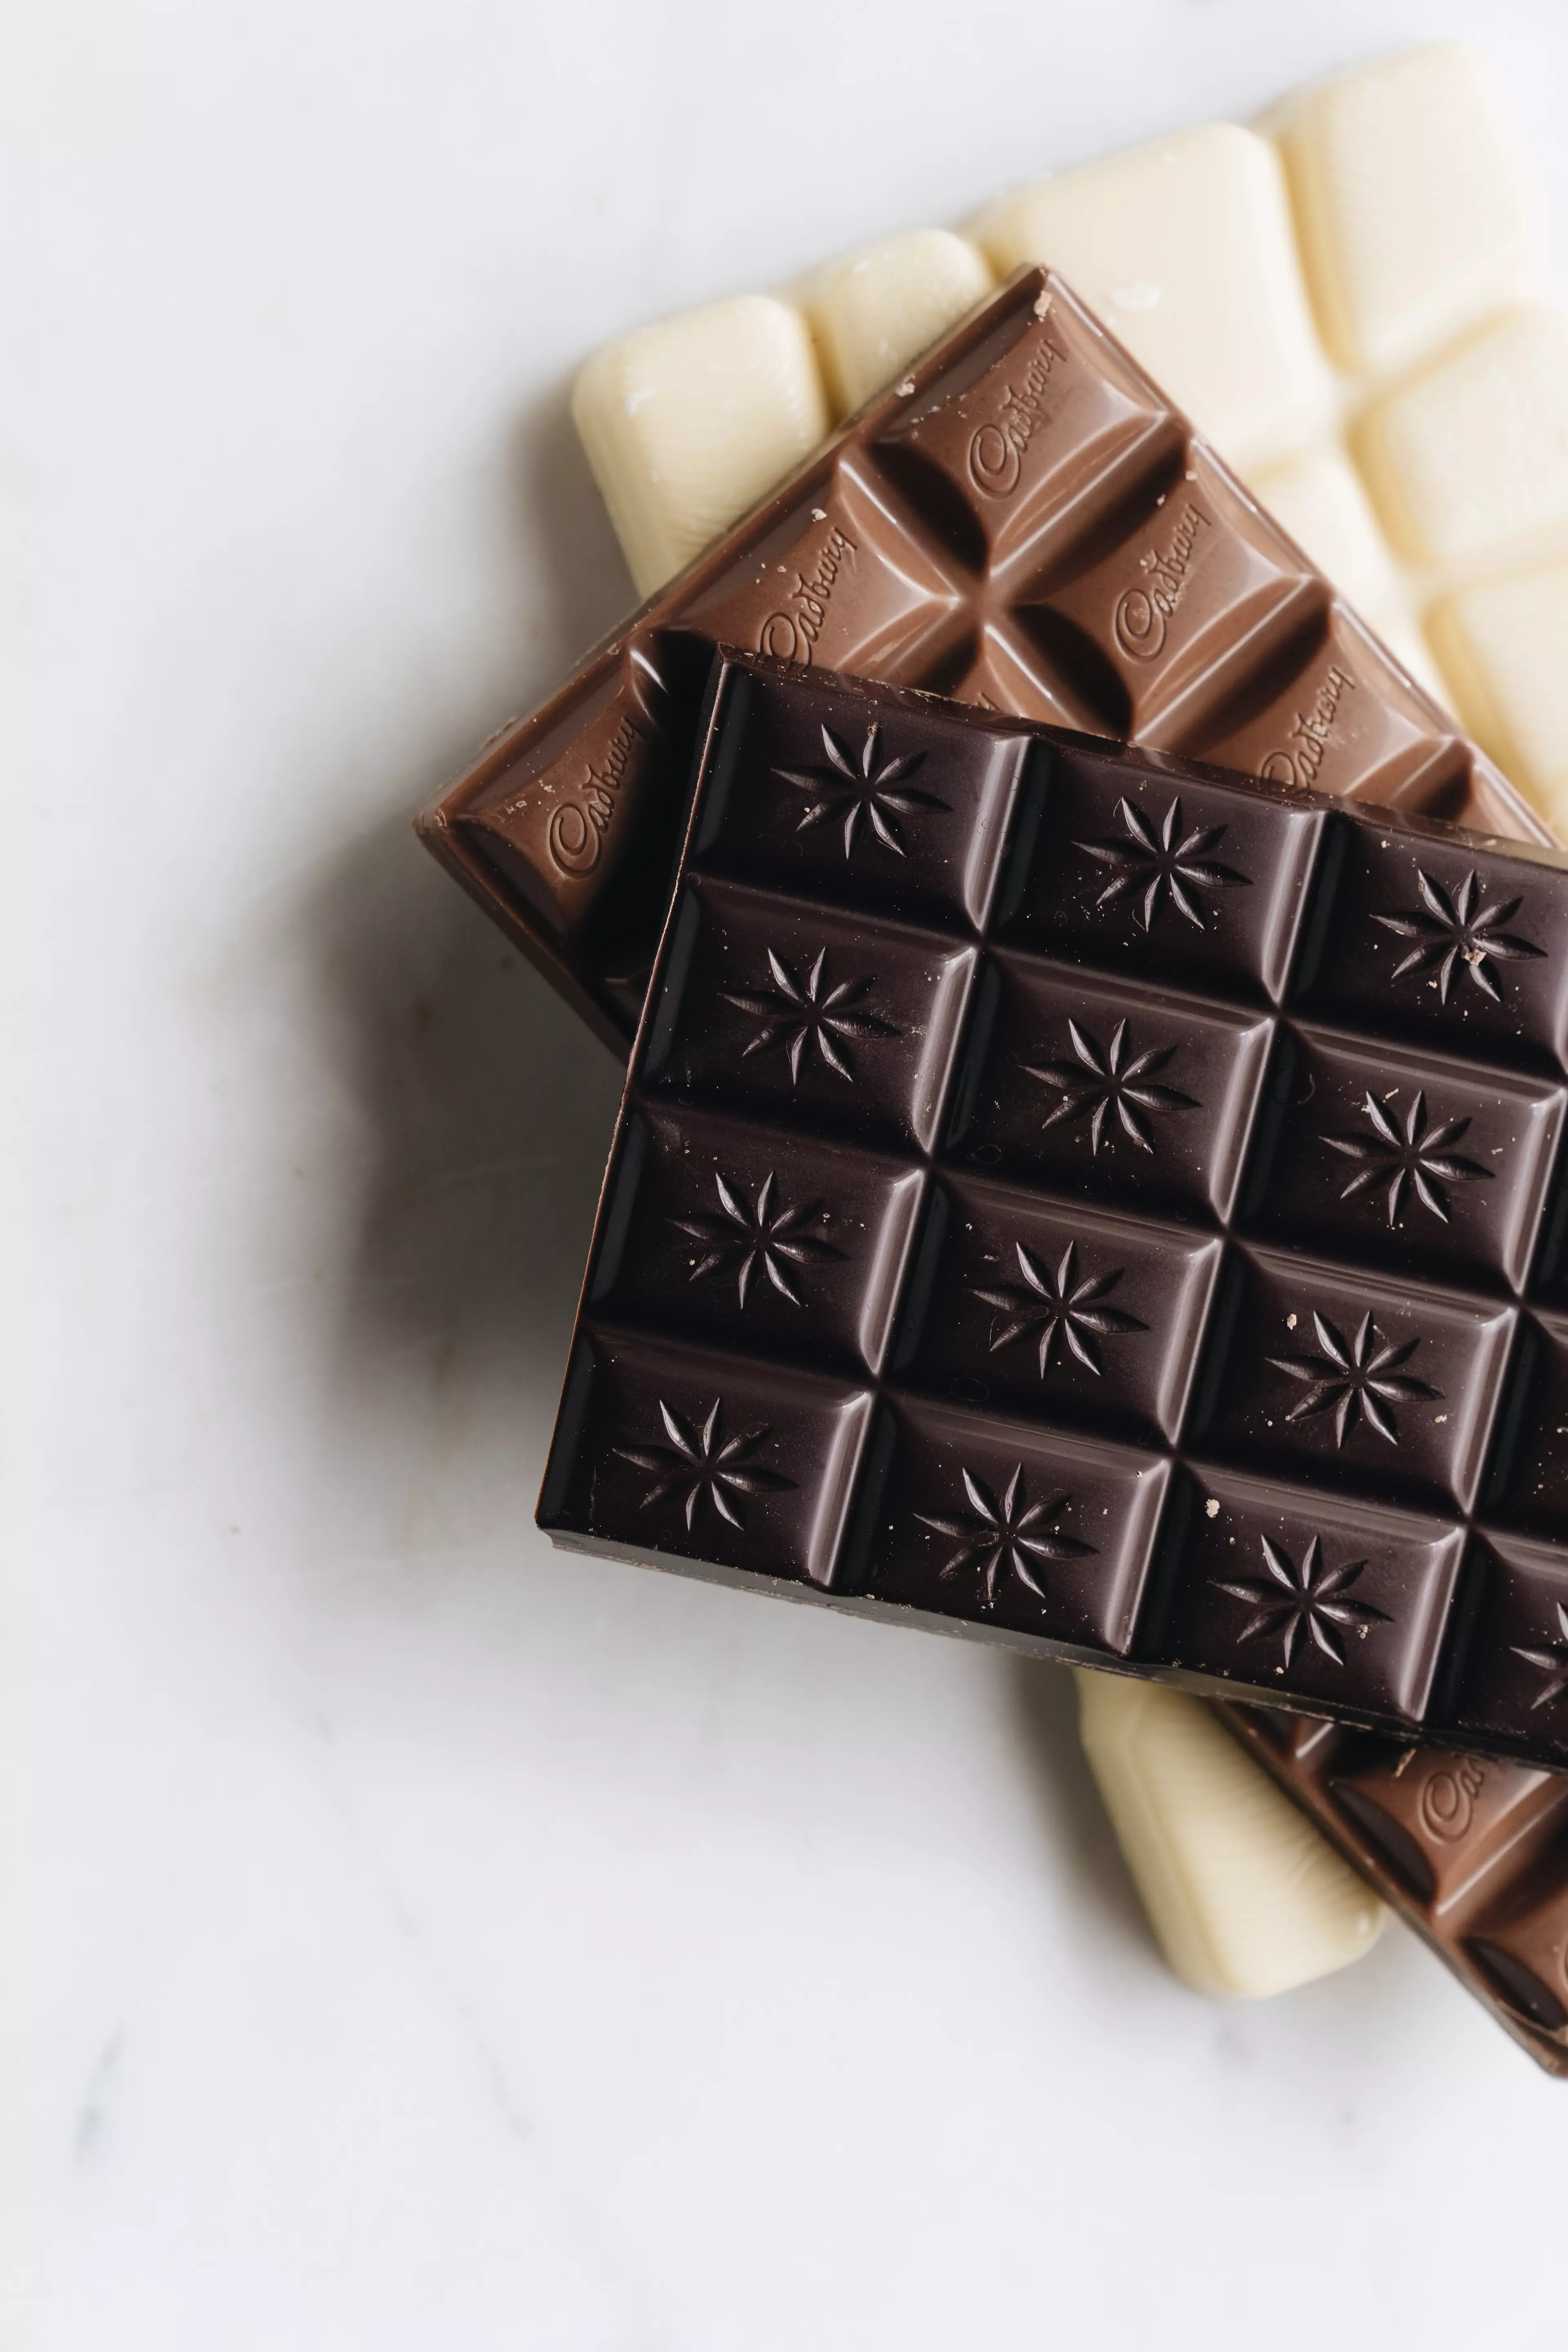 You can become a professional chocolate taster (